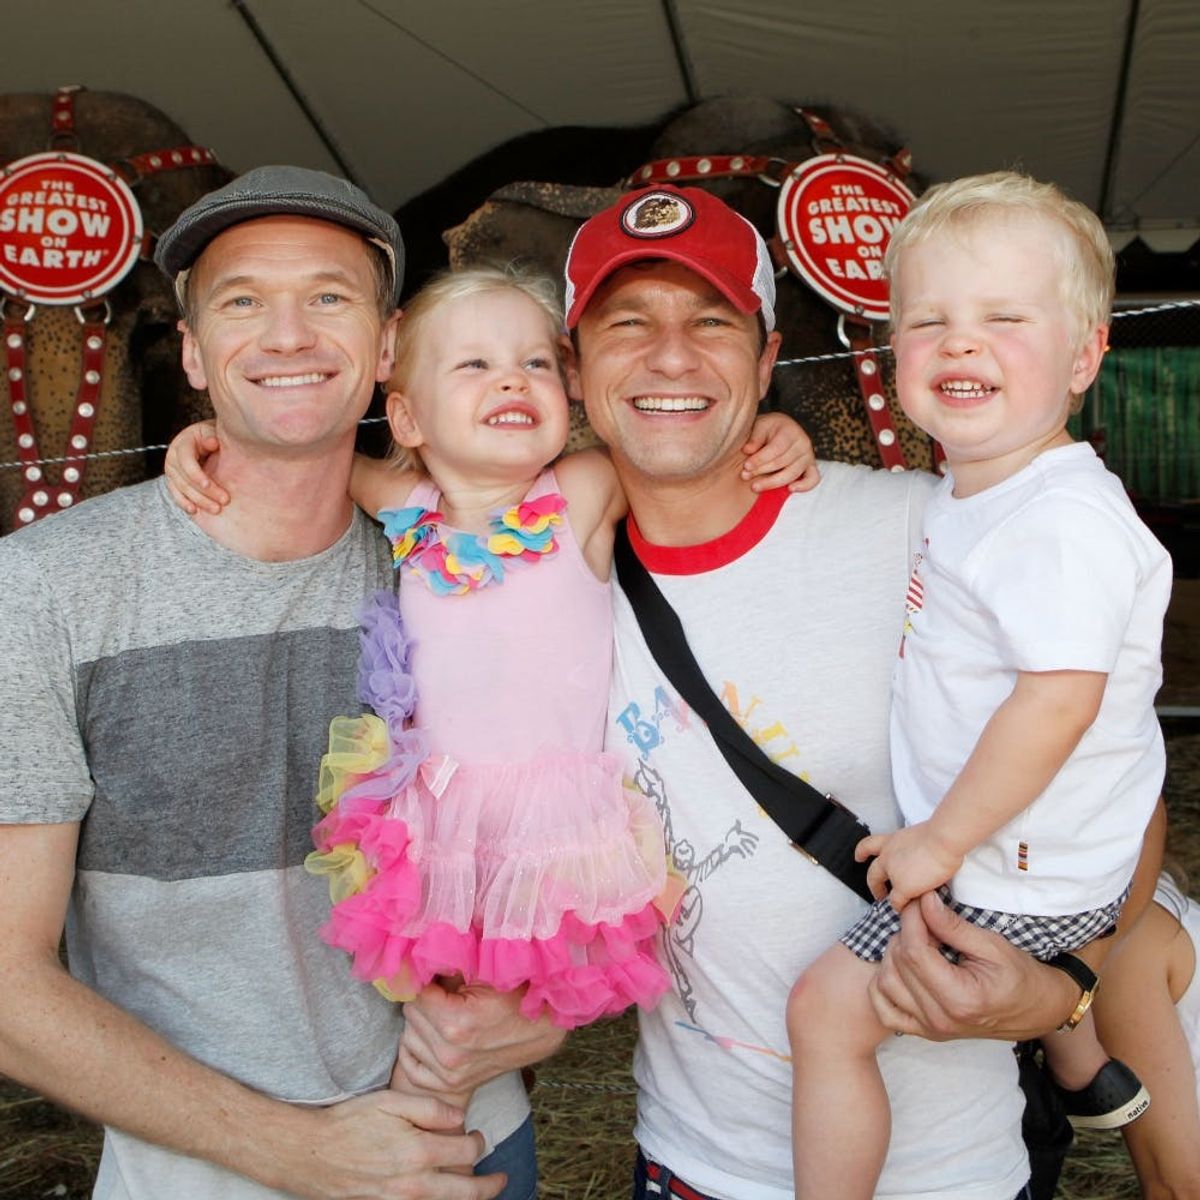 Neil Patrick Harris and His Adorable Family Just Won Halloween